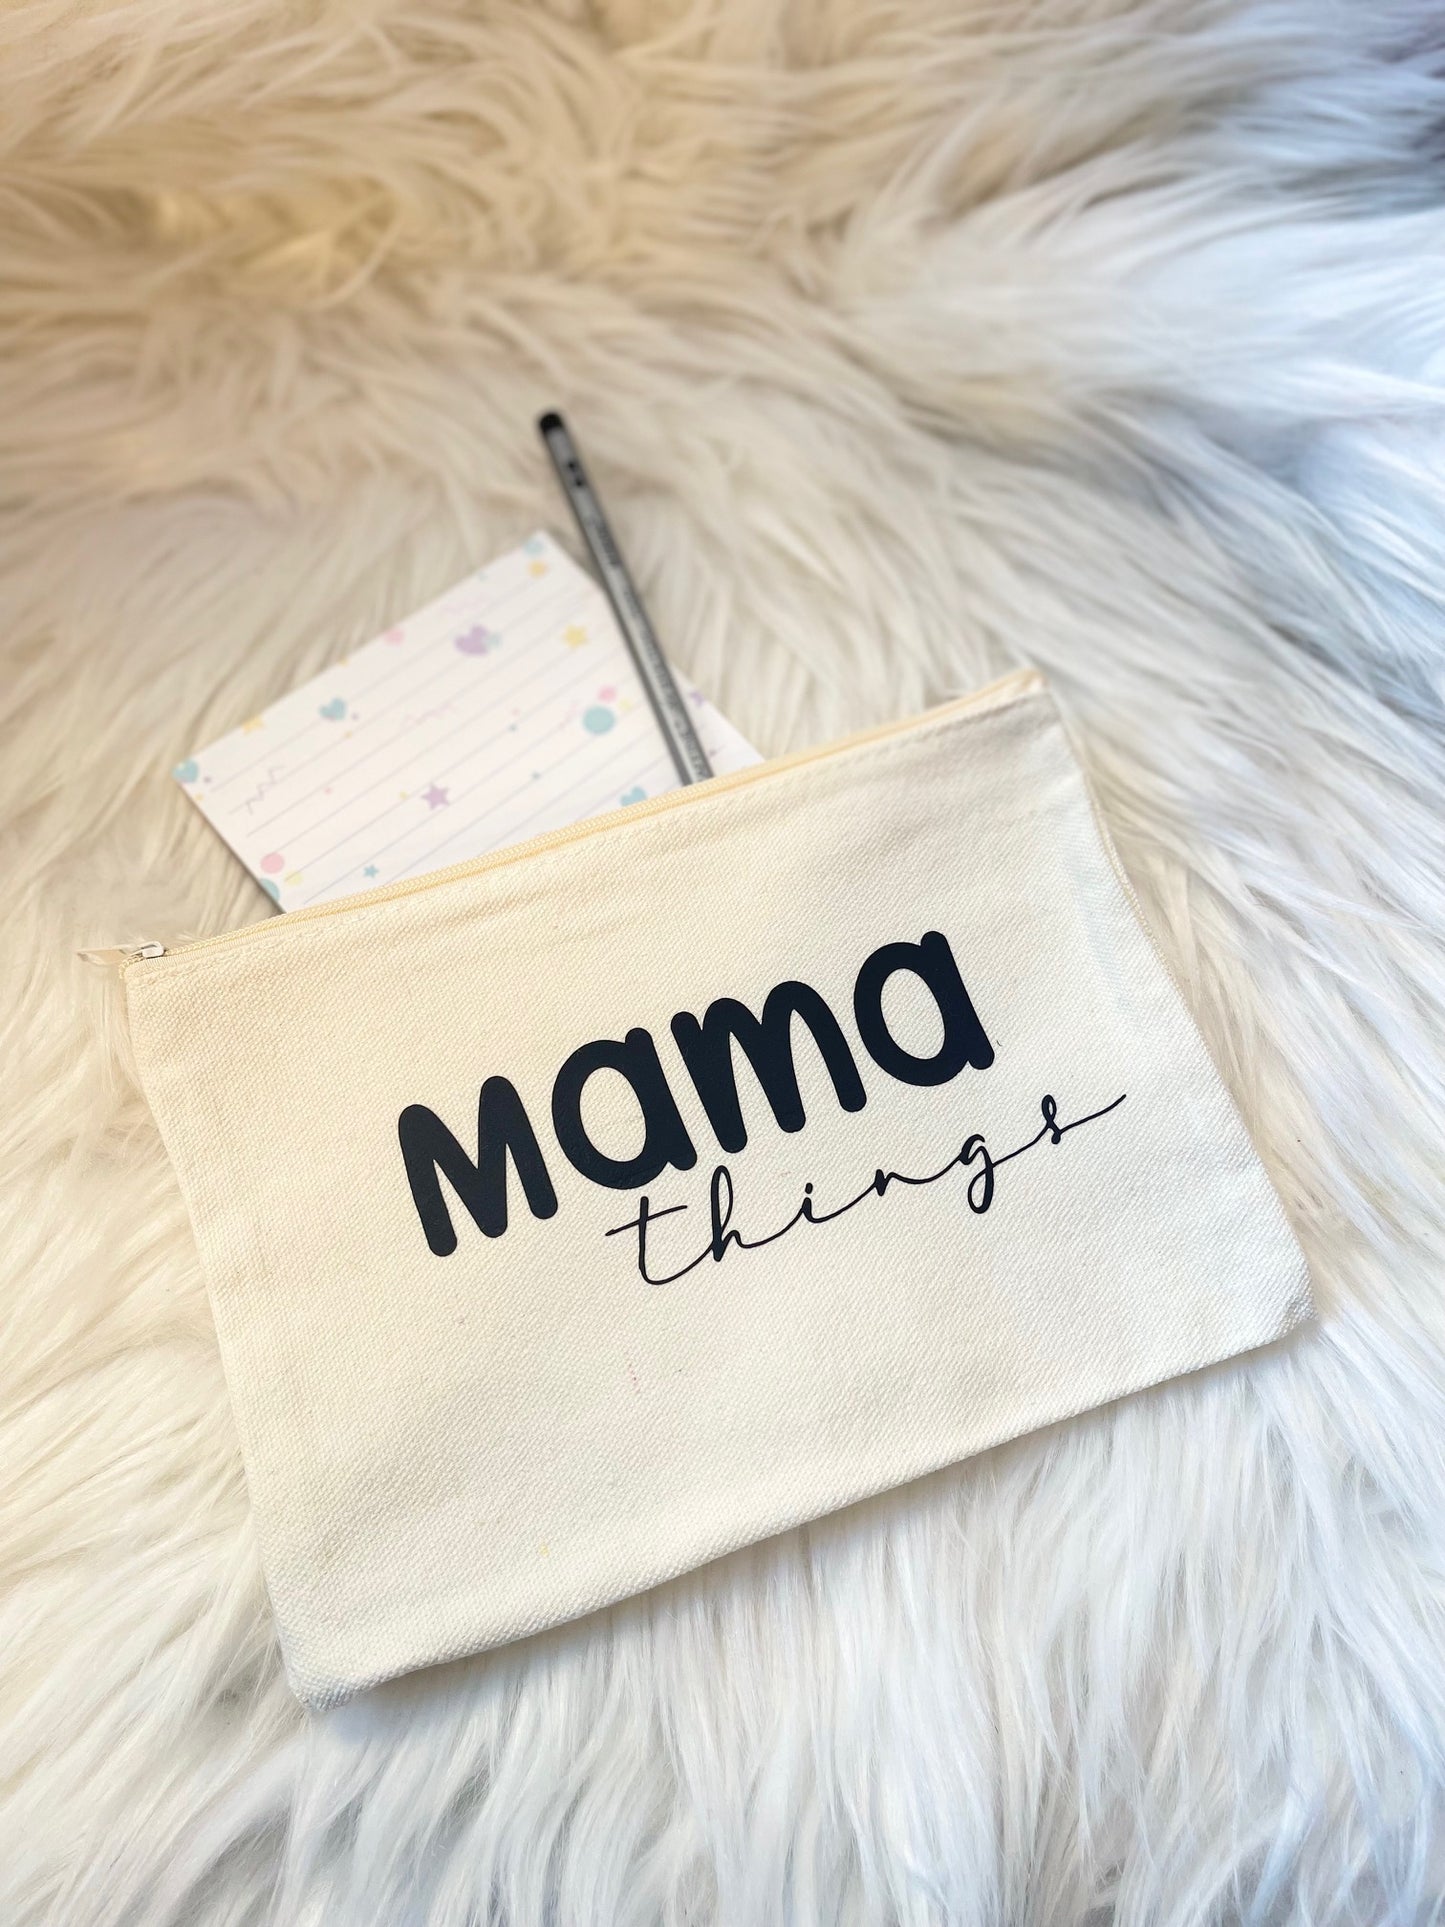 Cute mama cosmetic, make up, stationary, bag with zipper